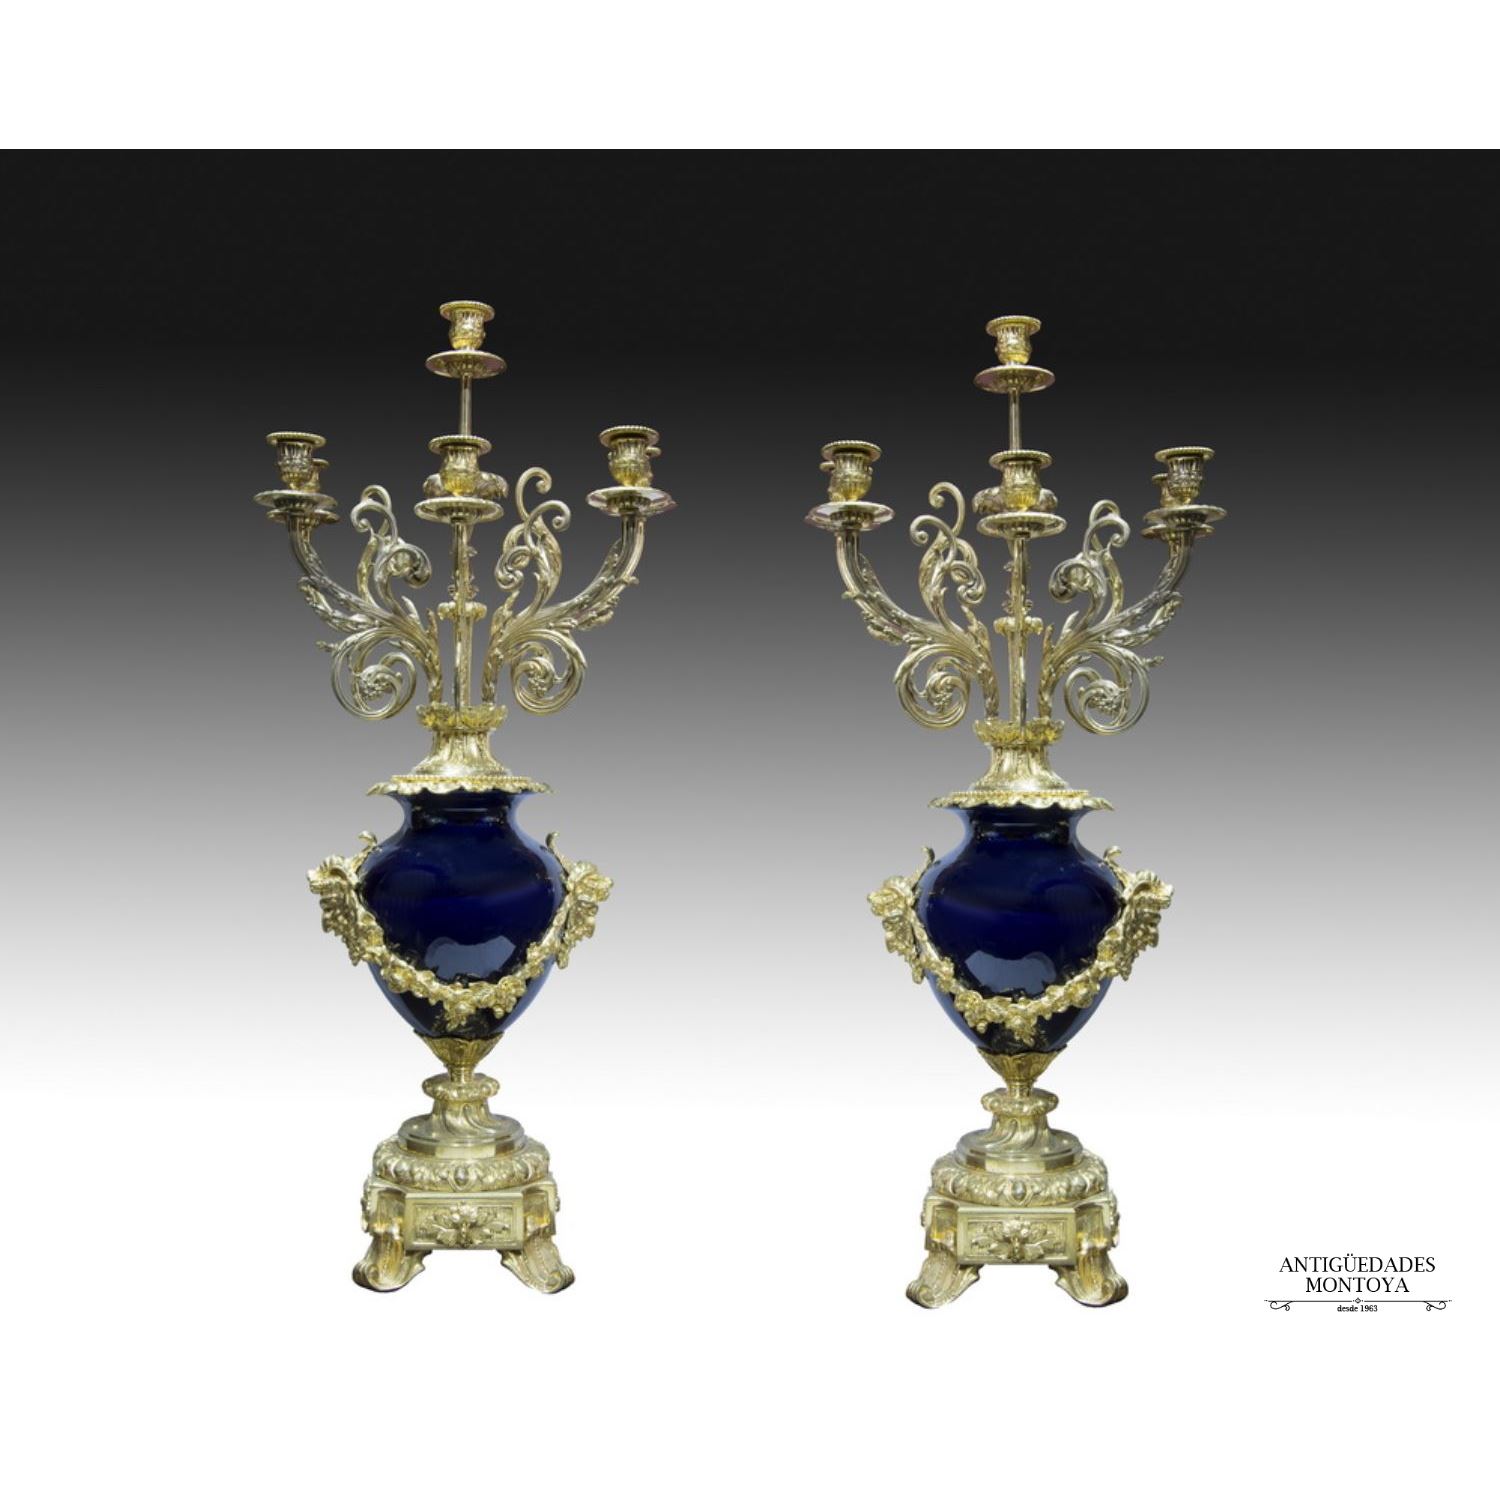 Pair of candlesticks, France, 19th century